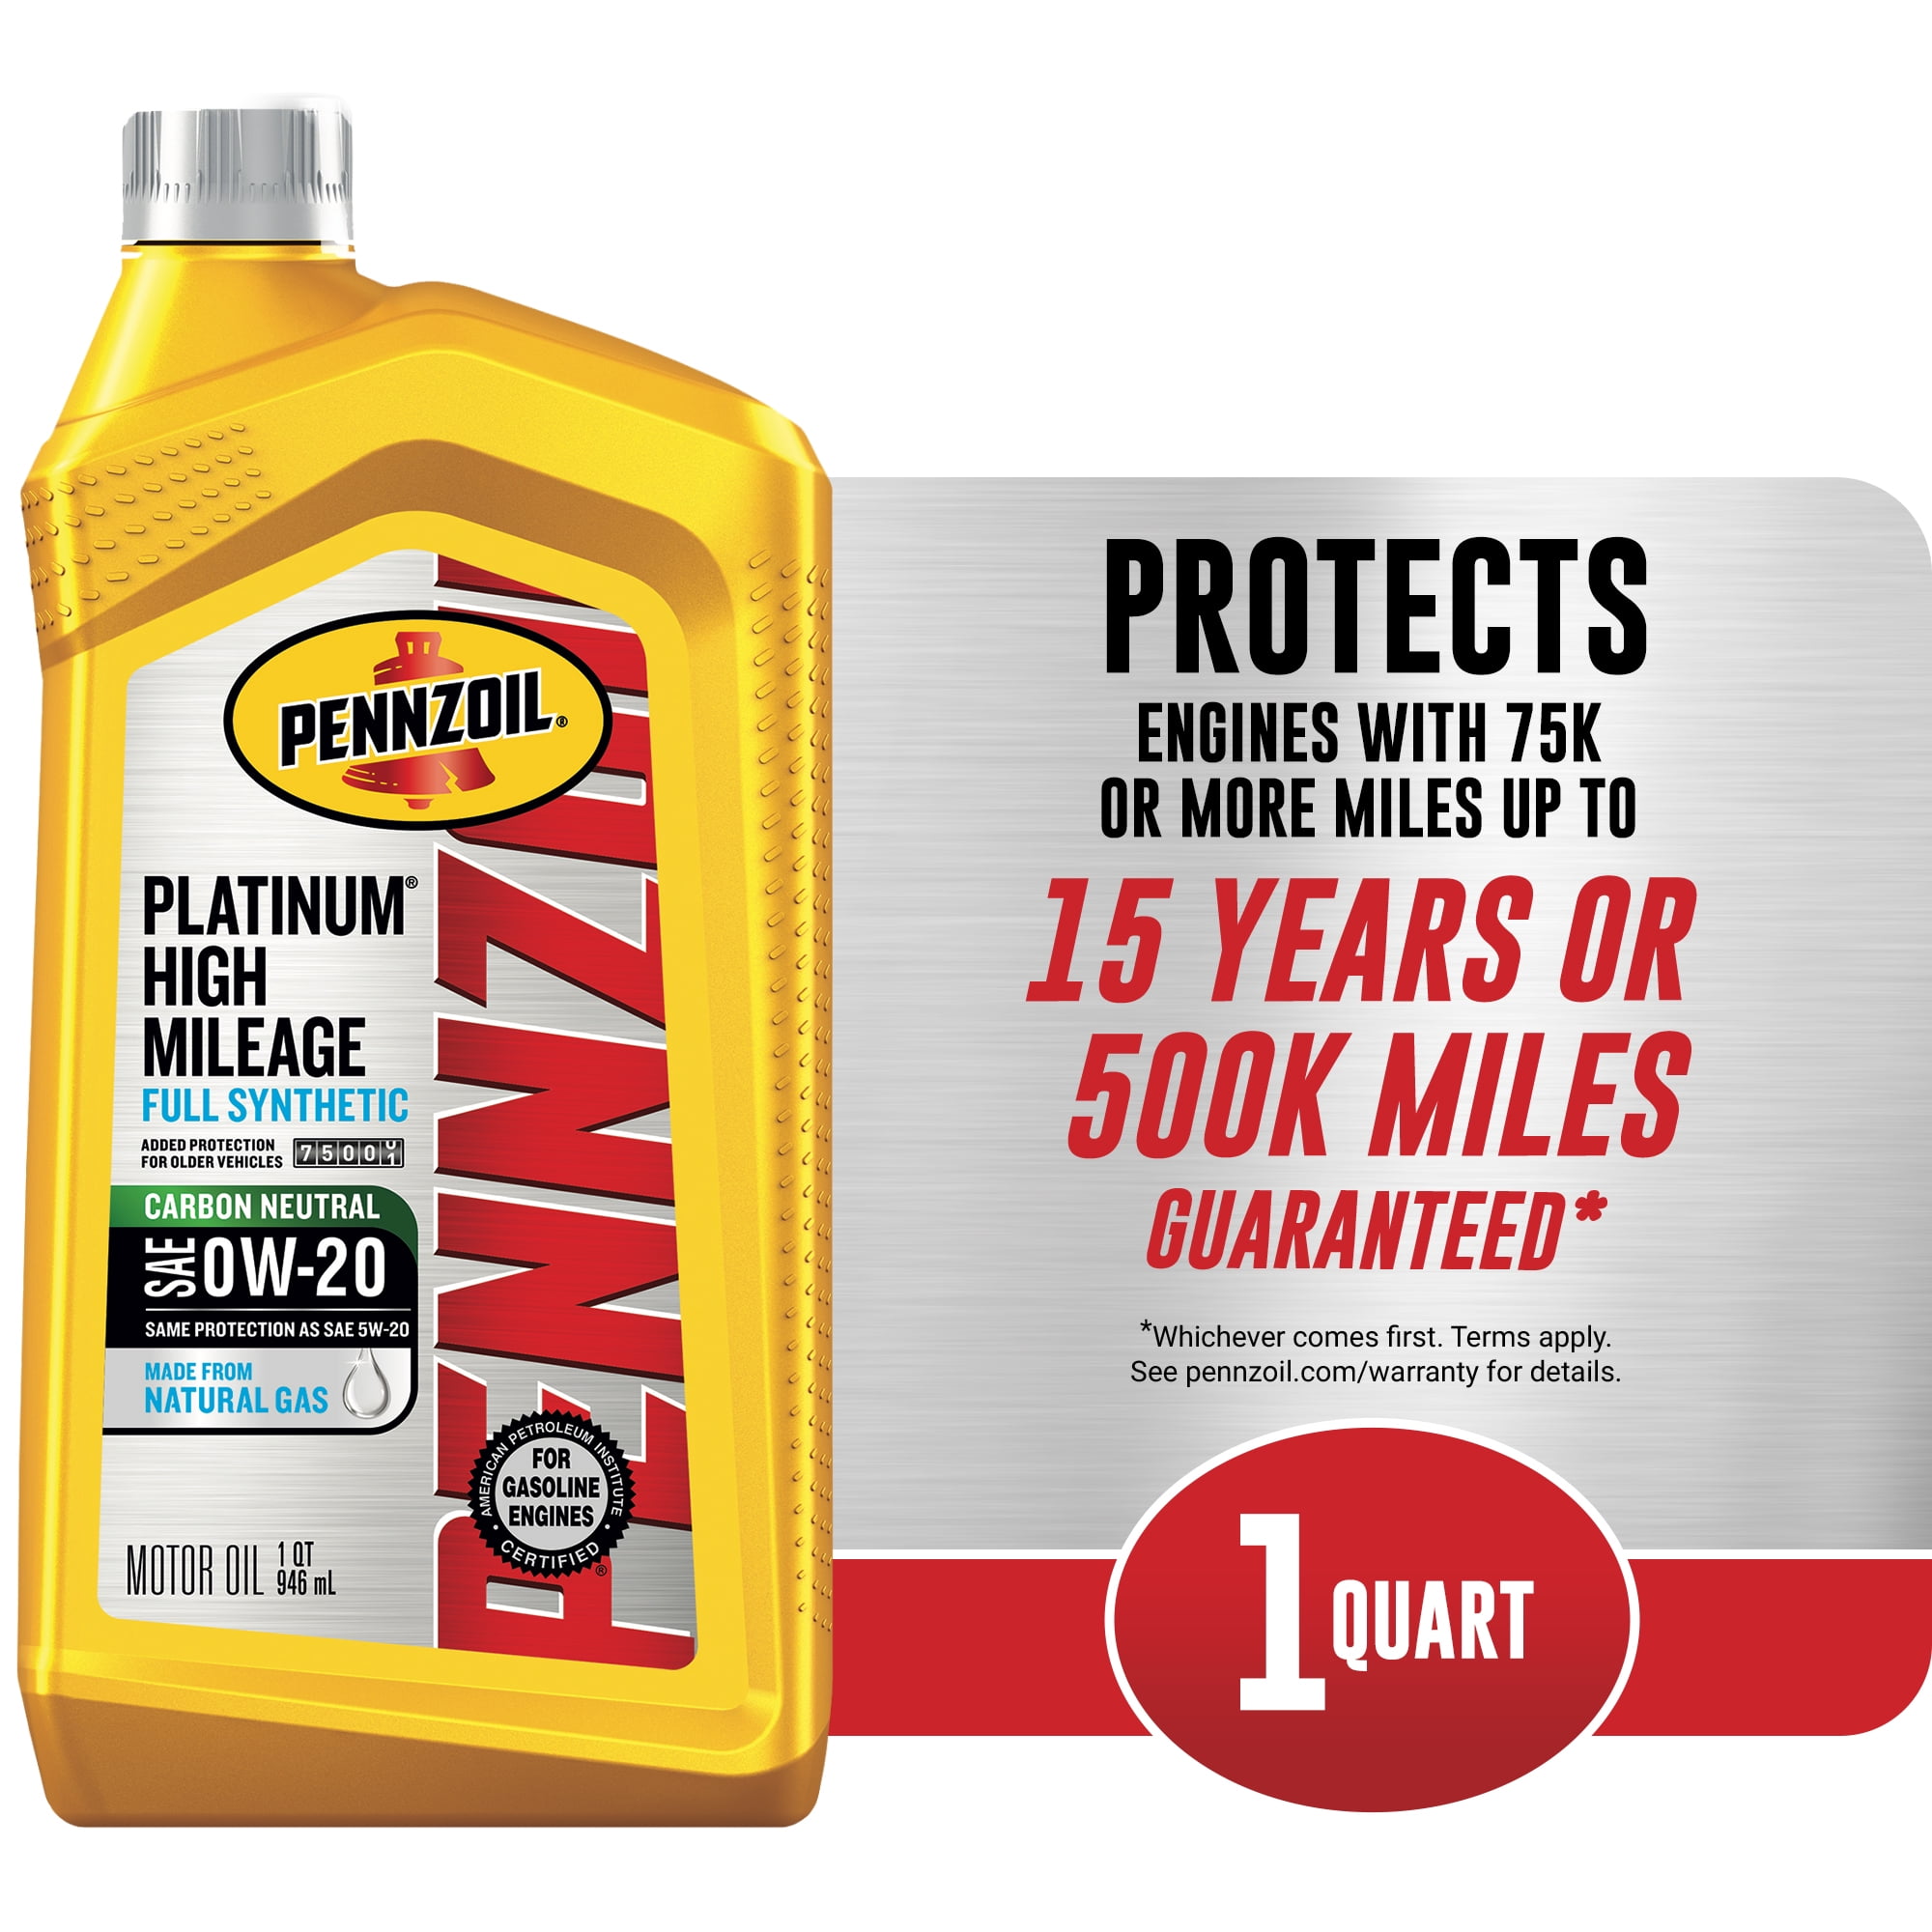 Pennzoil Platinum High Mileage Full Synthetic 0W-20 Motor Oil, 1